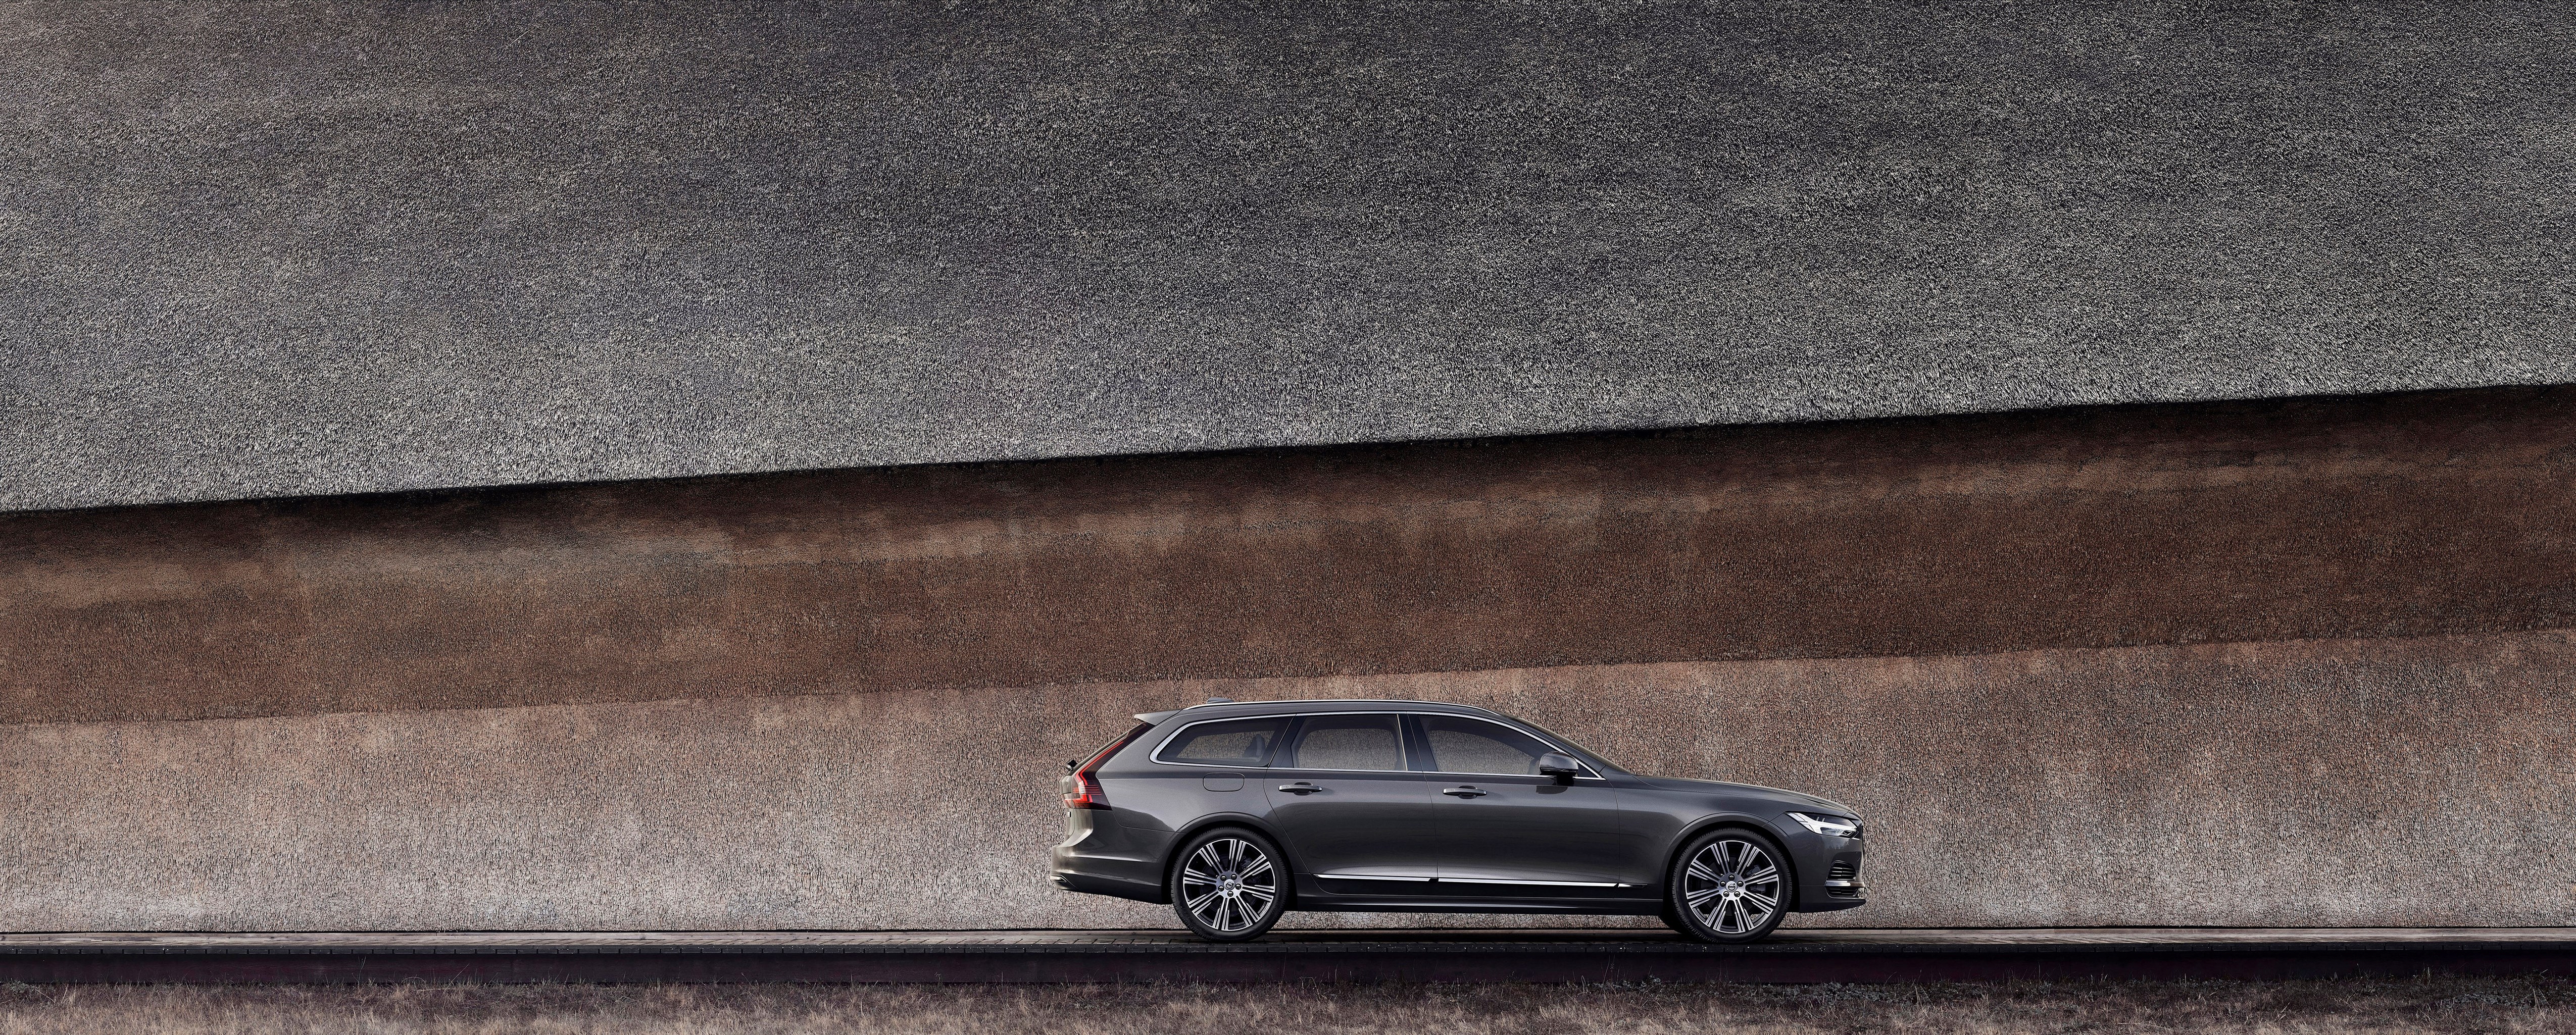 Volvo S90 hd specifications